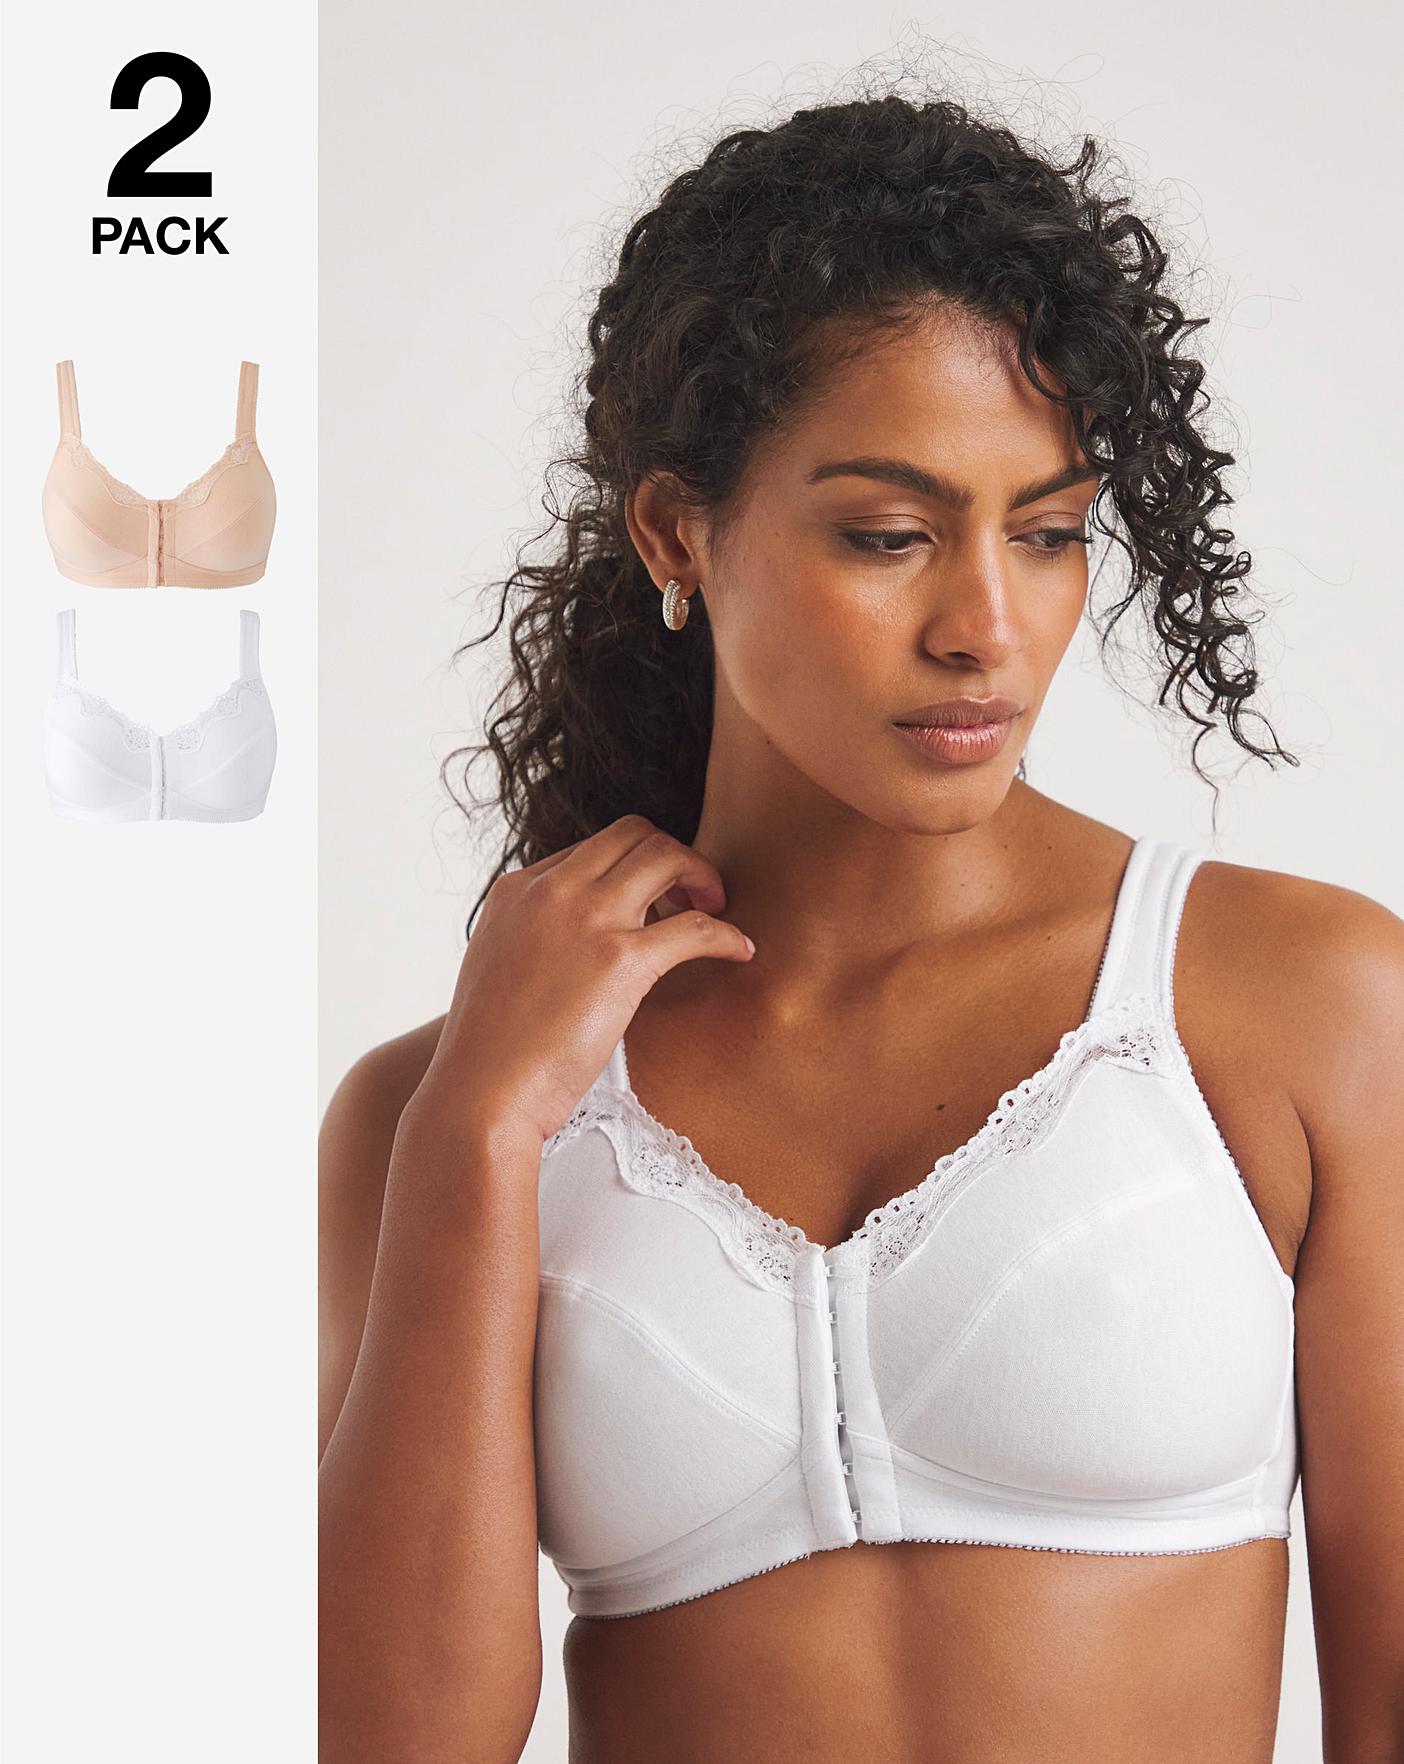 Pin on Bras Designed for the Modern Woman